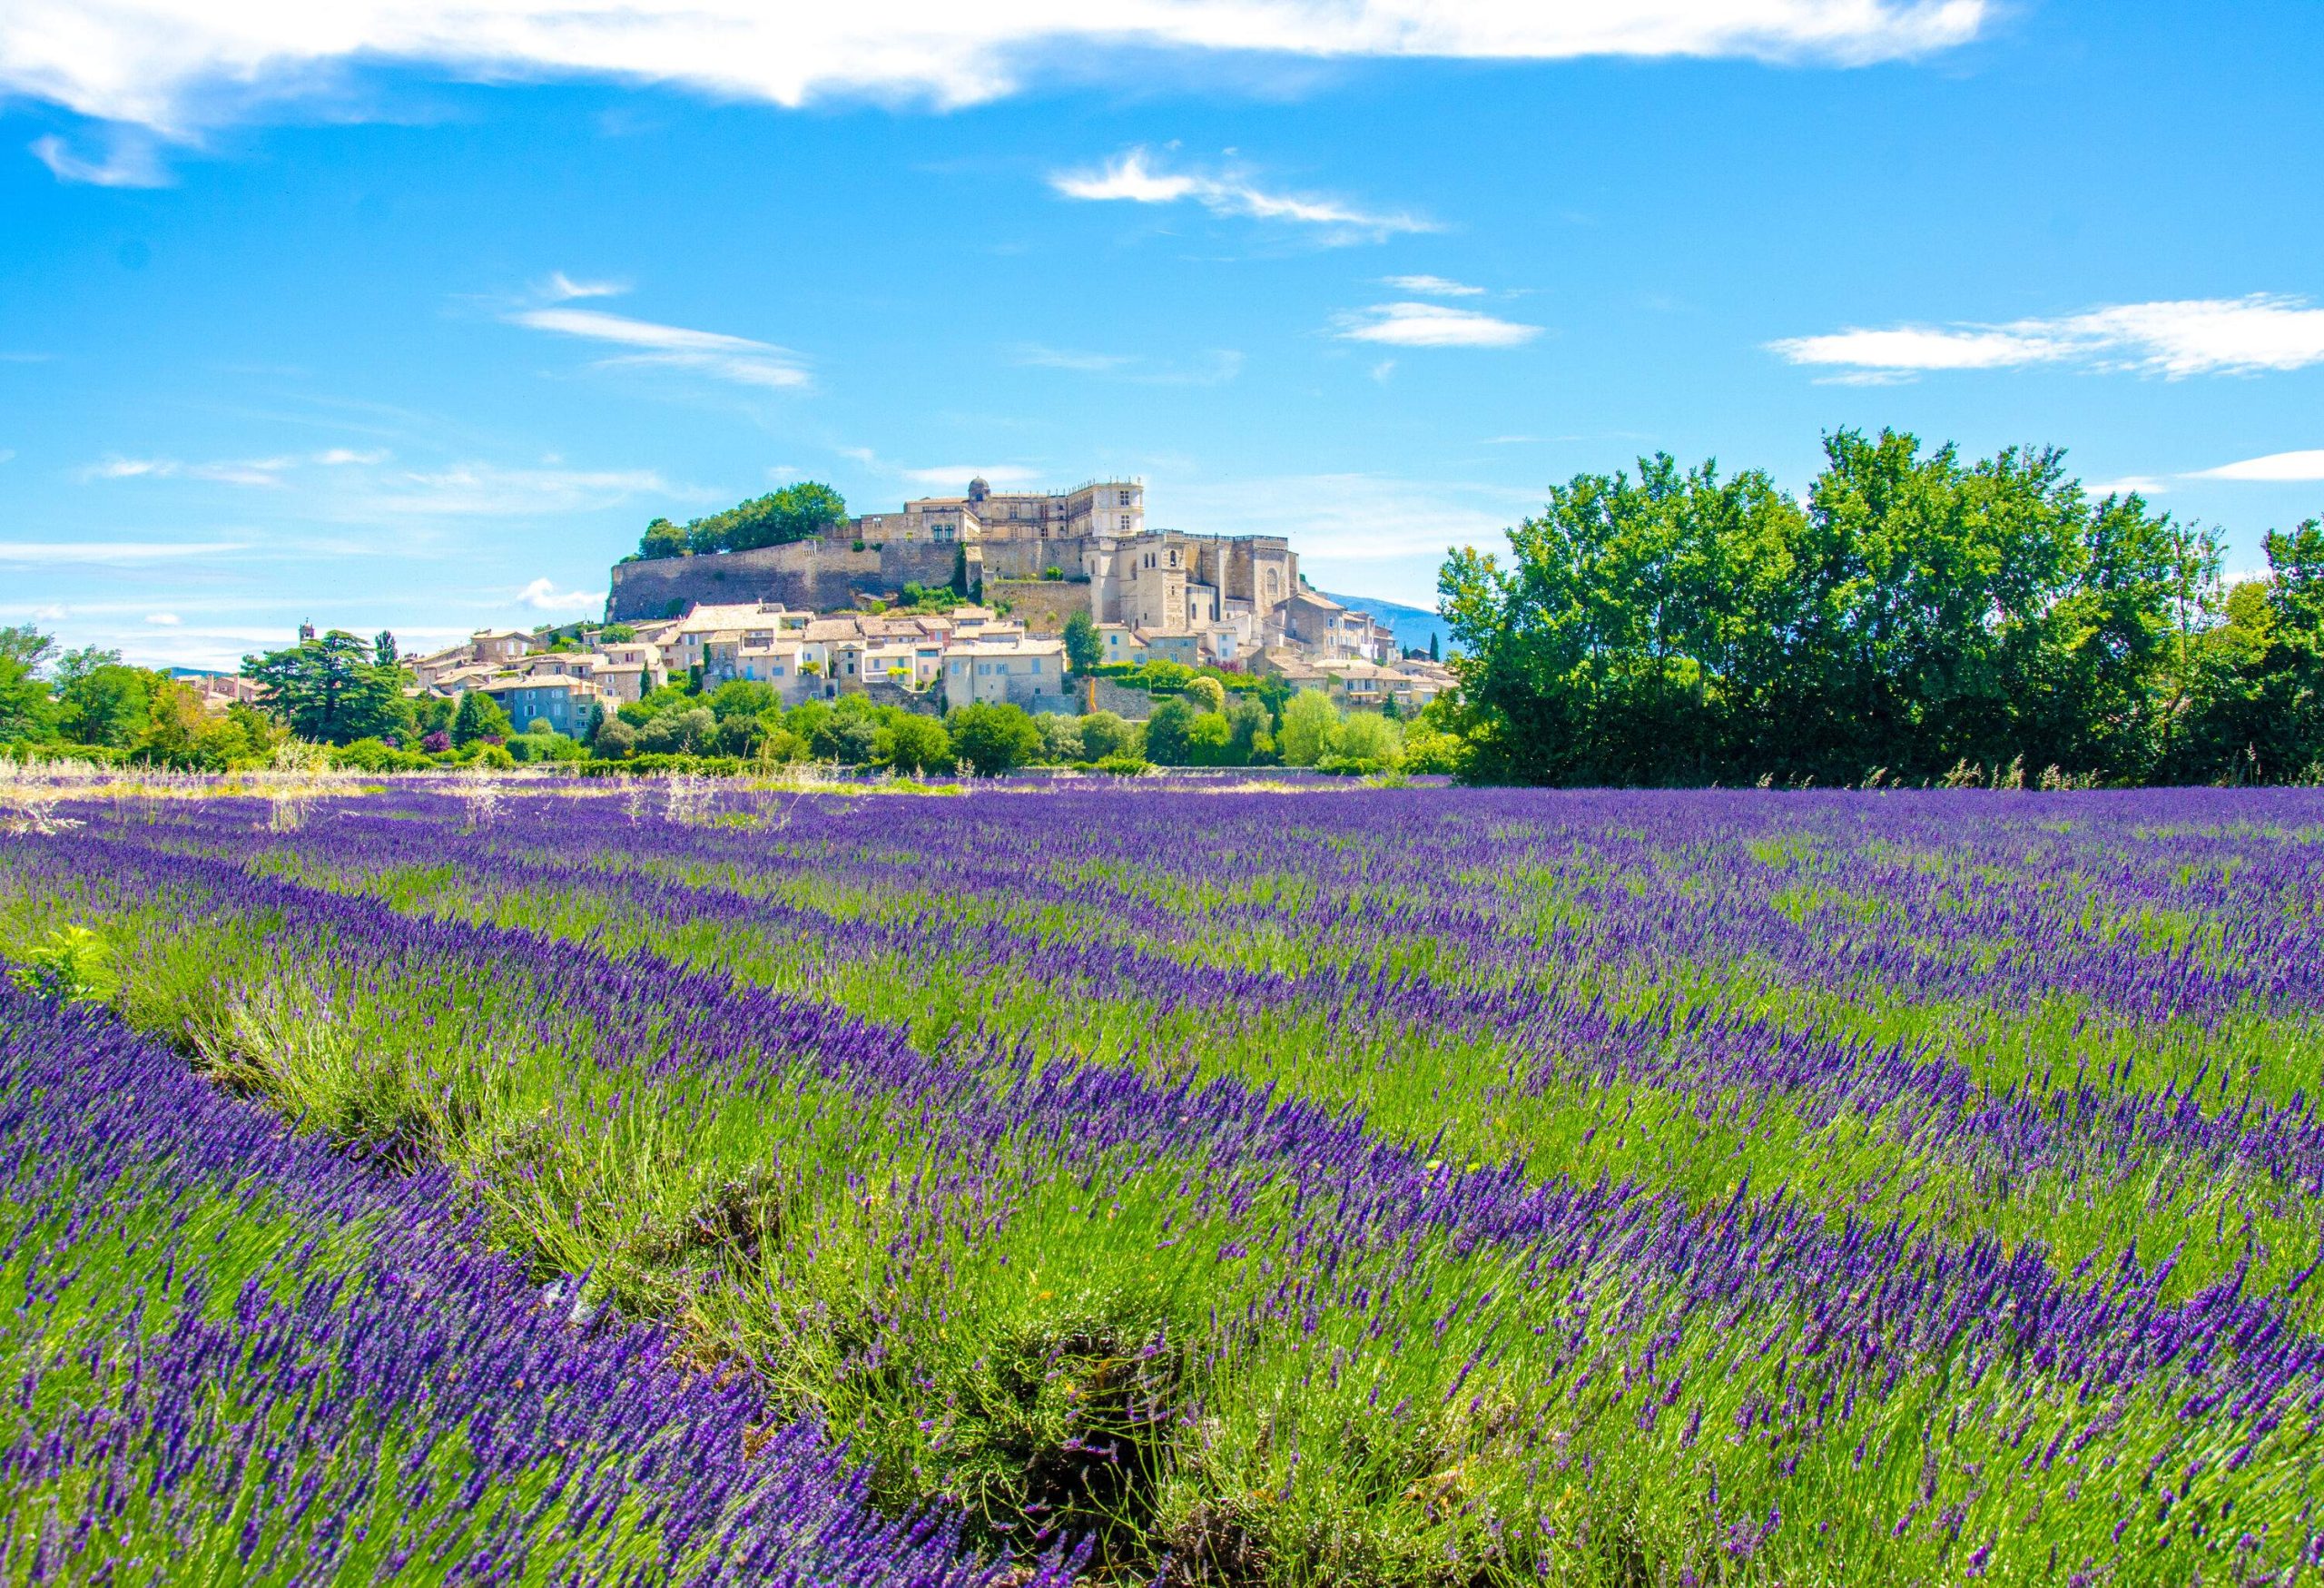 A field of lavender shrubs with an ancient hilltop village in the background.